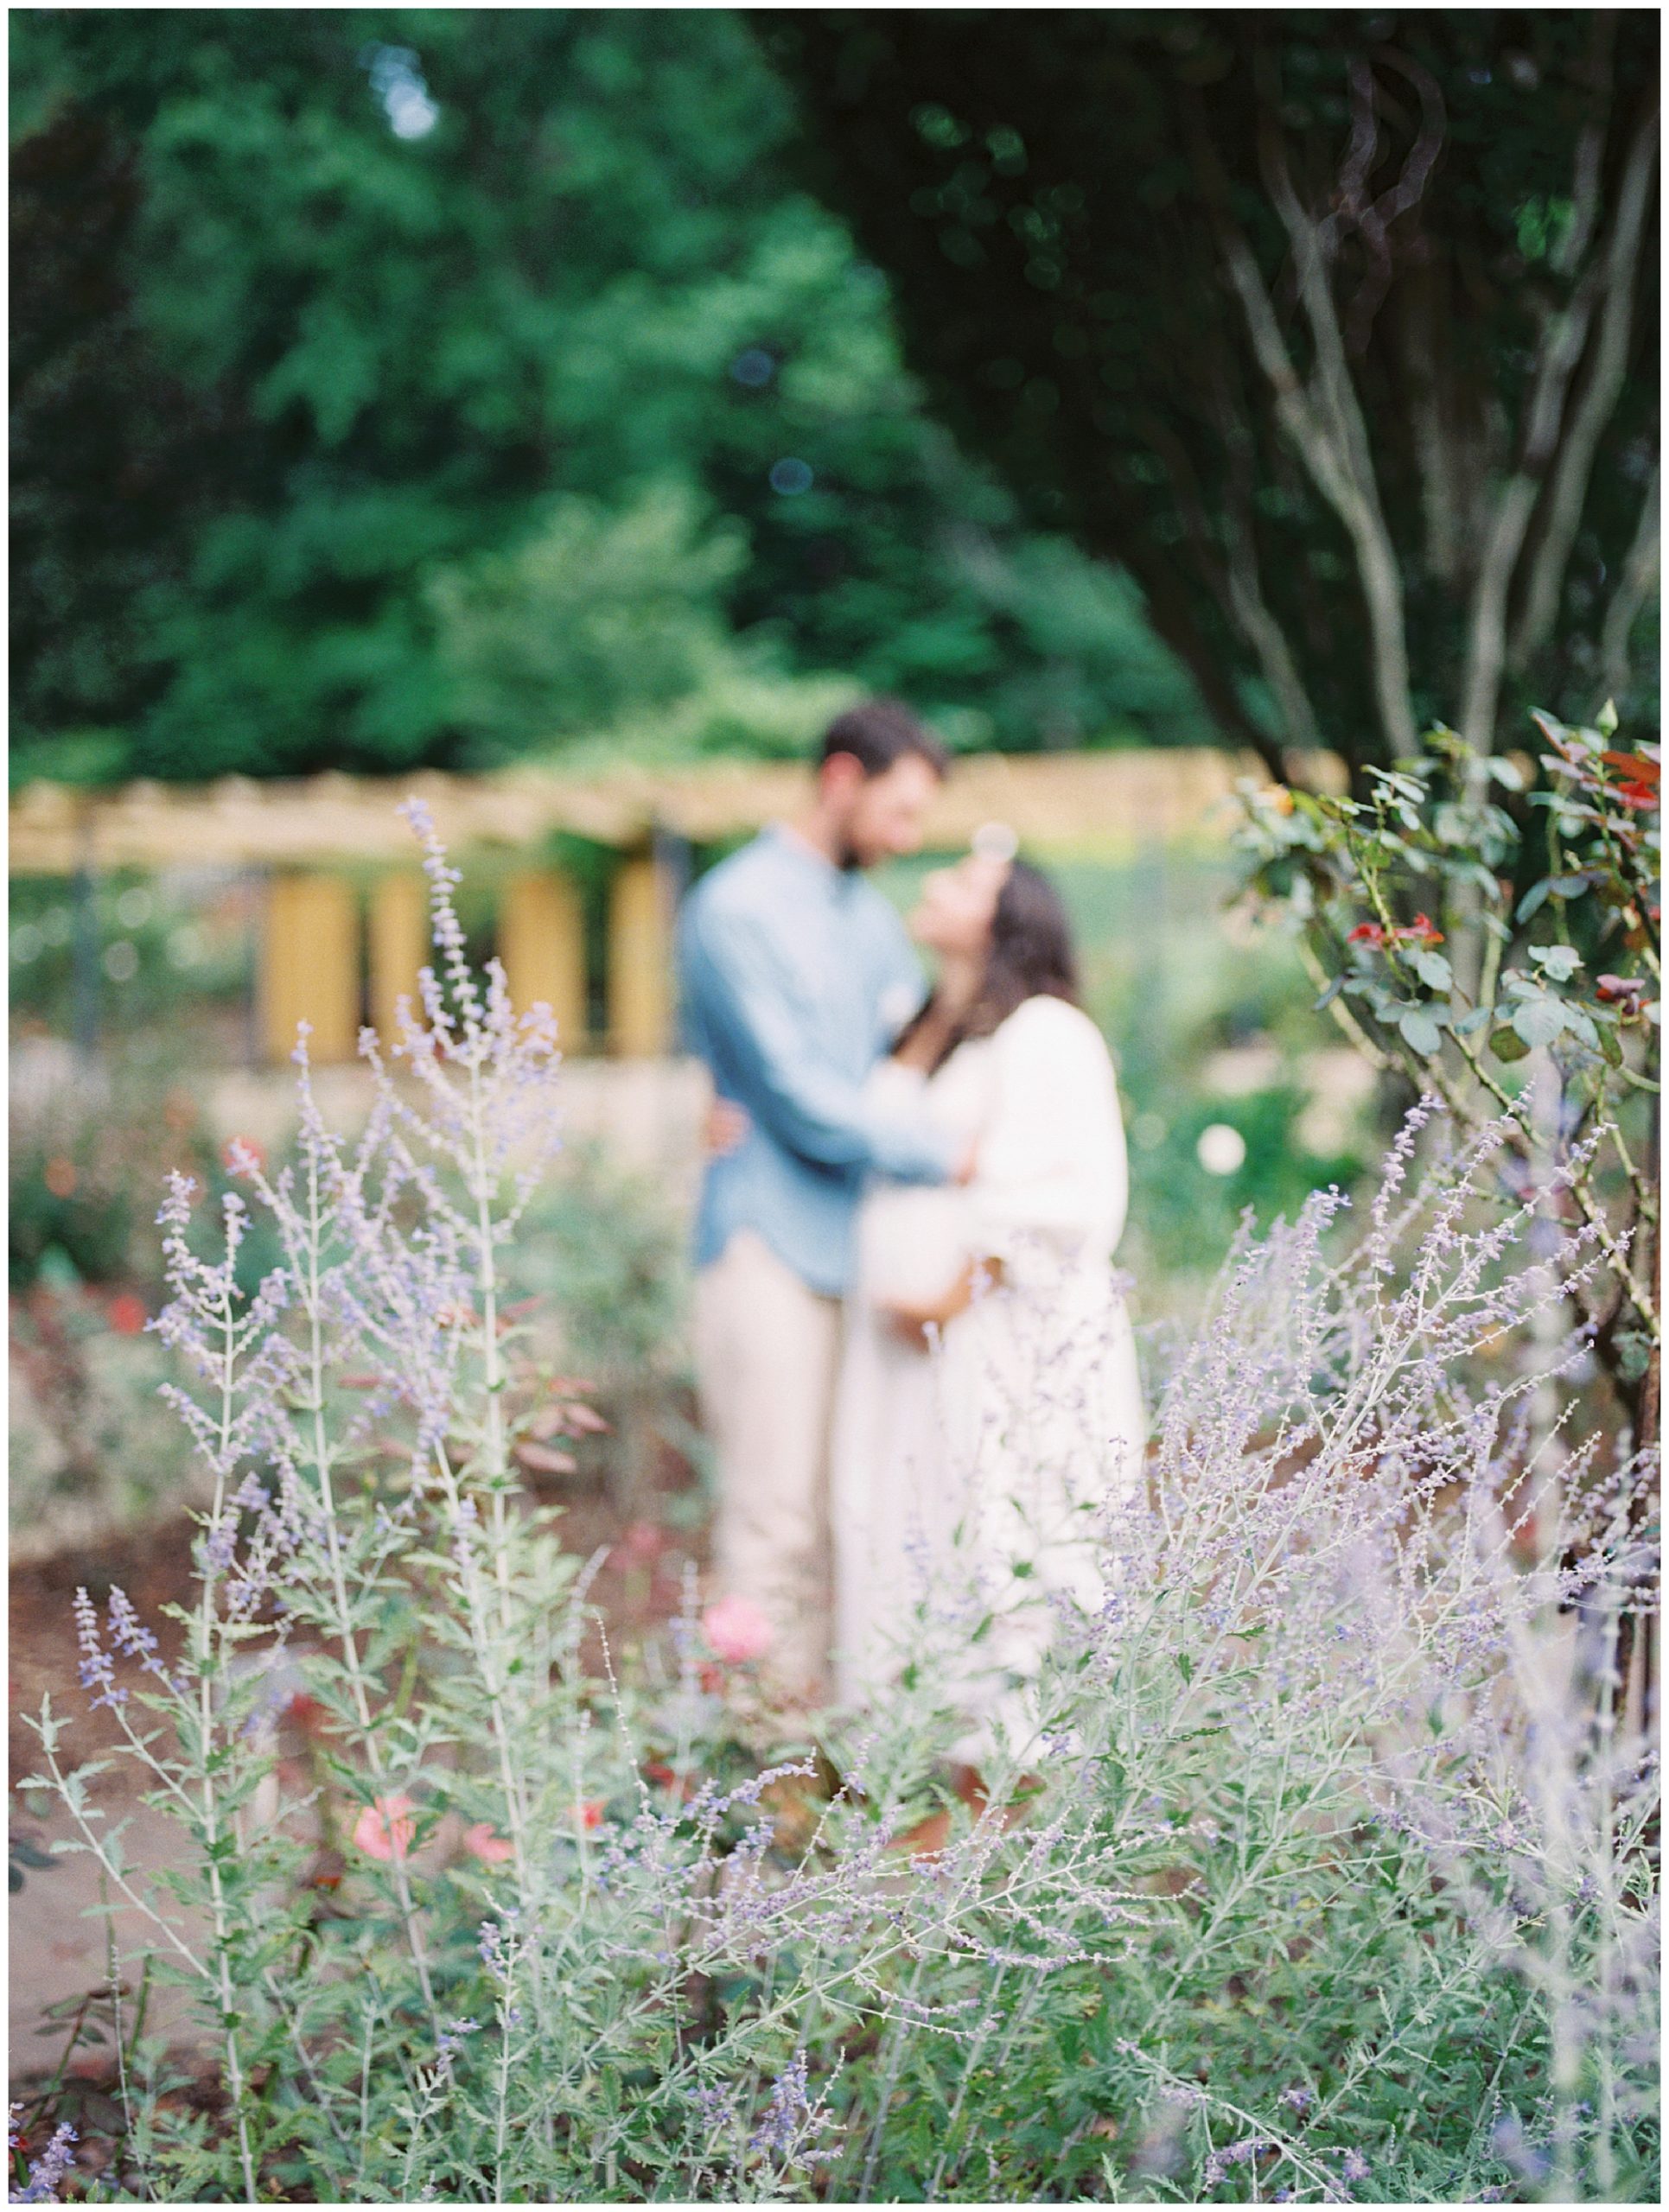 Out of focus image of mother and father embracing during their floral maternity session in Brookside Gardens.